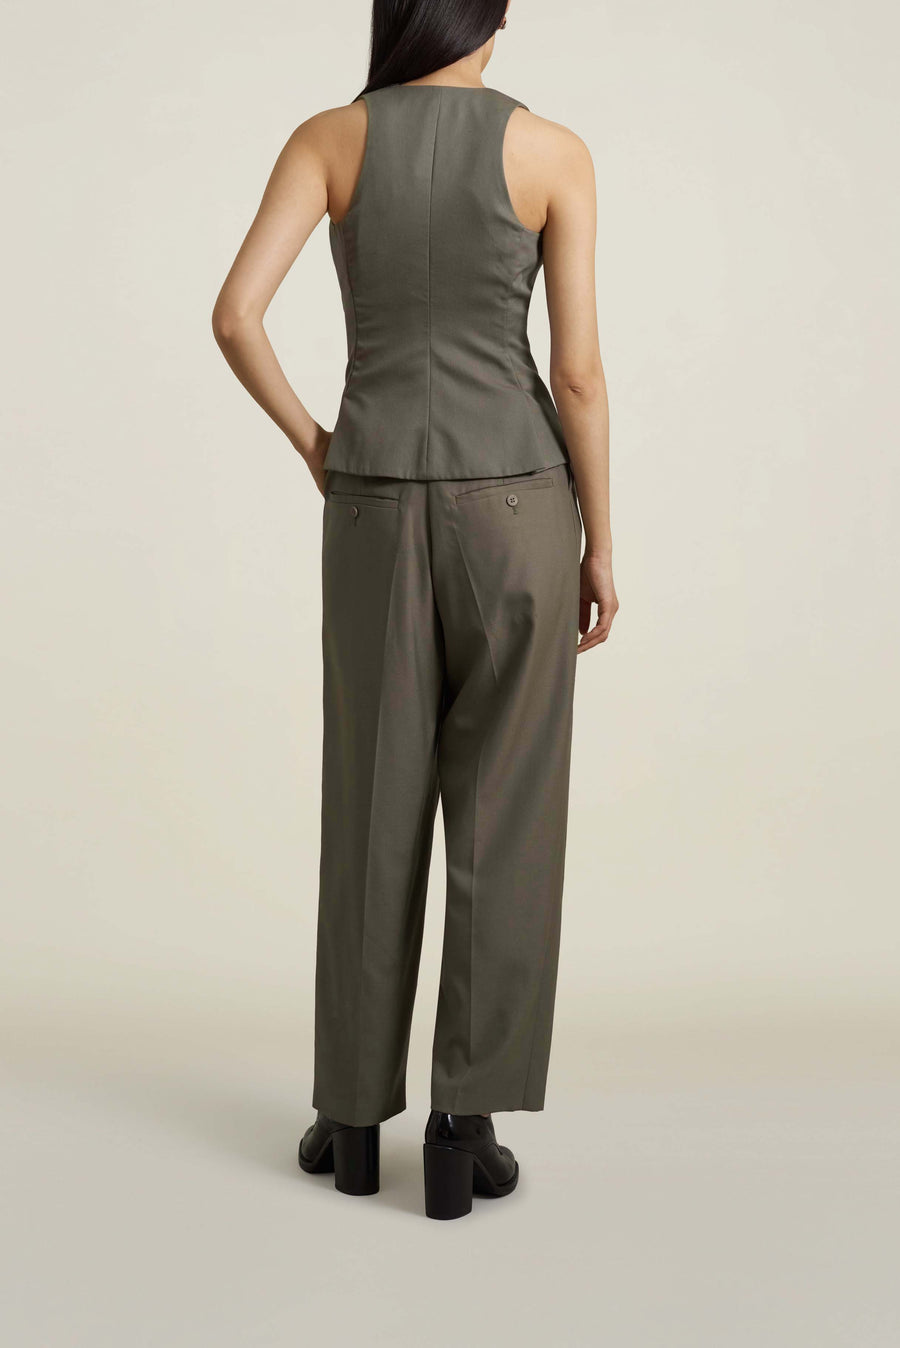 Houghton Pleated Trouser in Sage